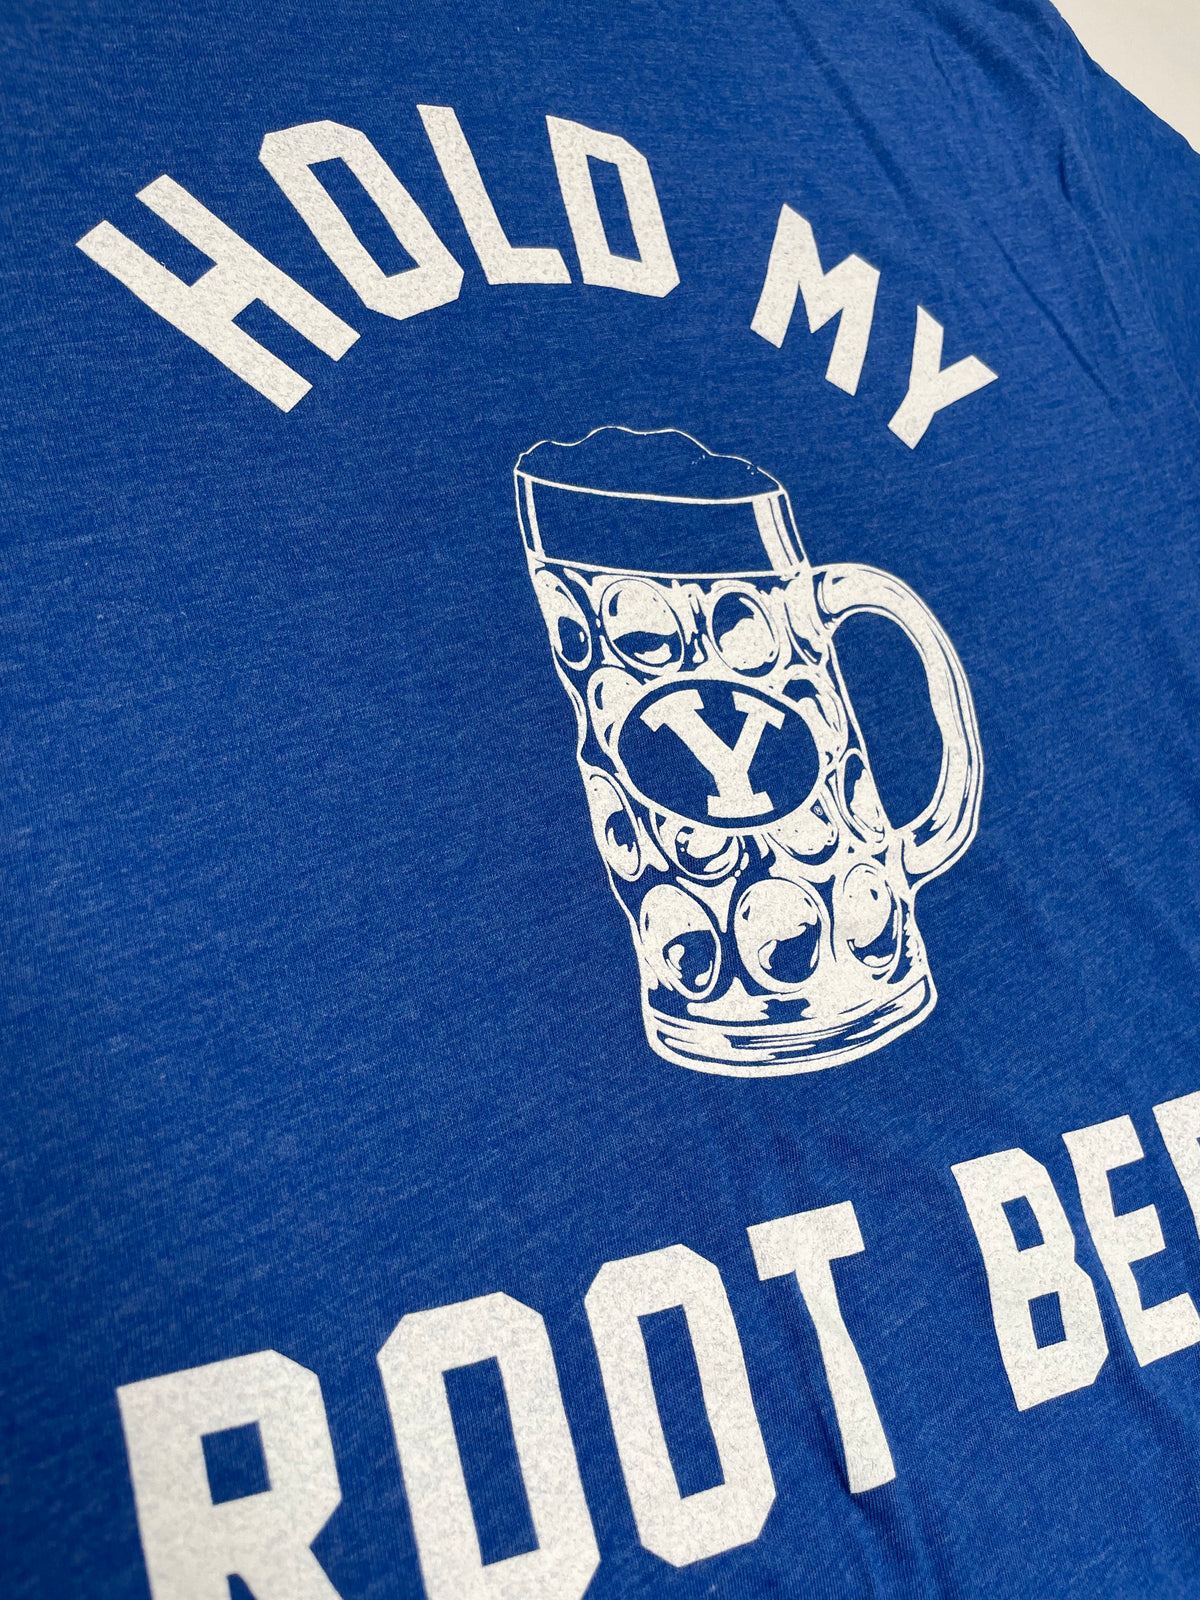 Hold My Root Beer T-Shirt - Royal and White